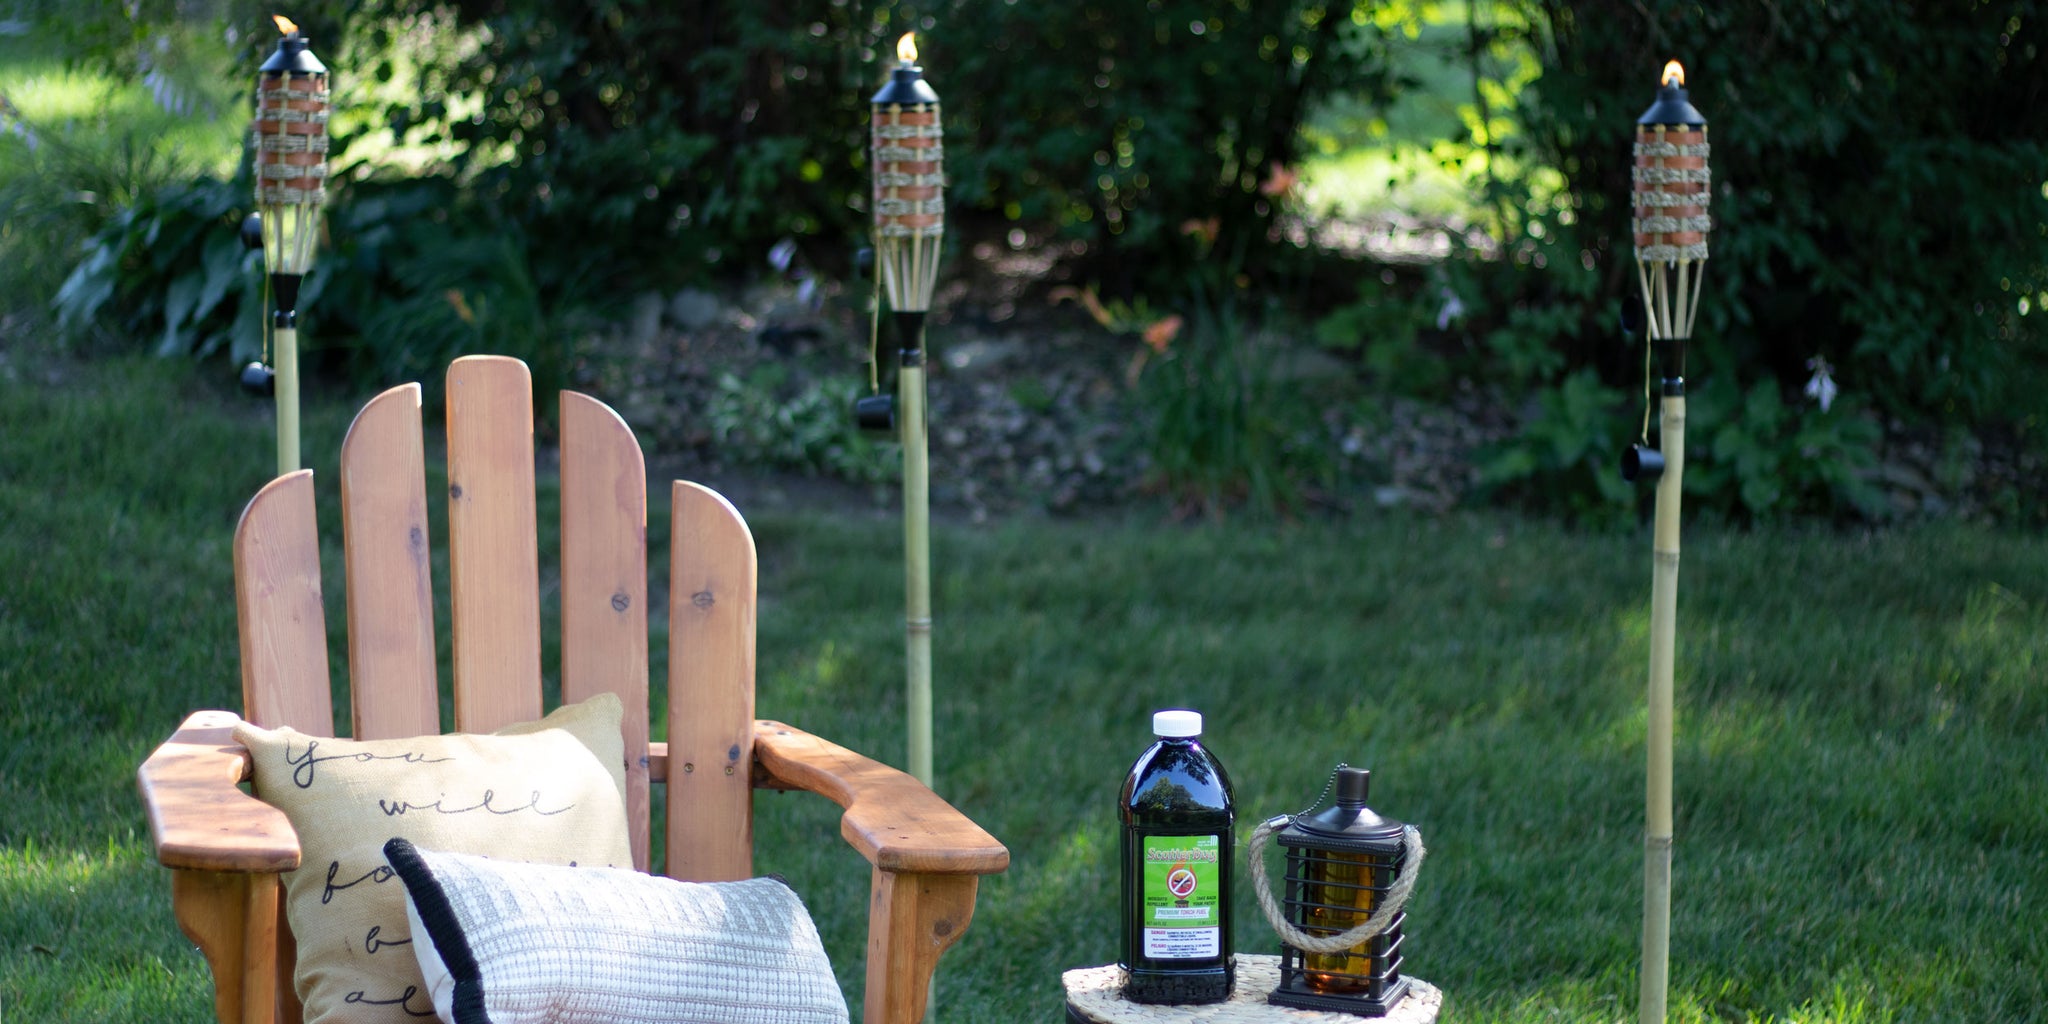 How Well Does Scatterbug Torch Fuel Keep Mosquitoes Away? | Patio Essentials